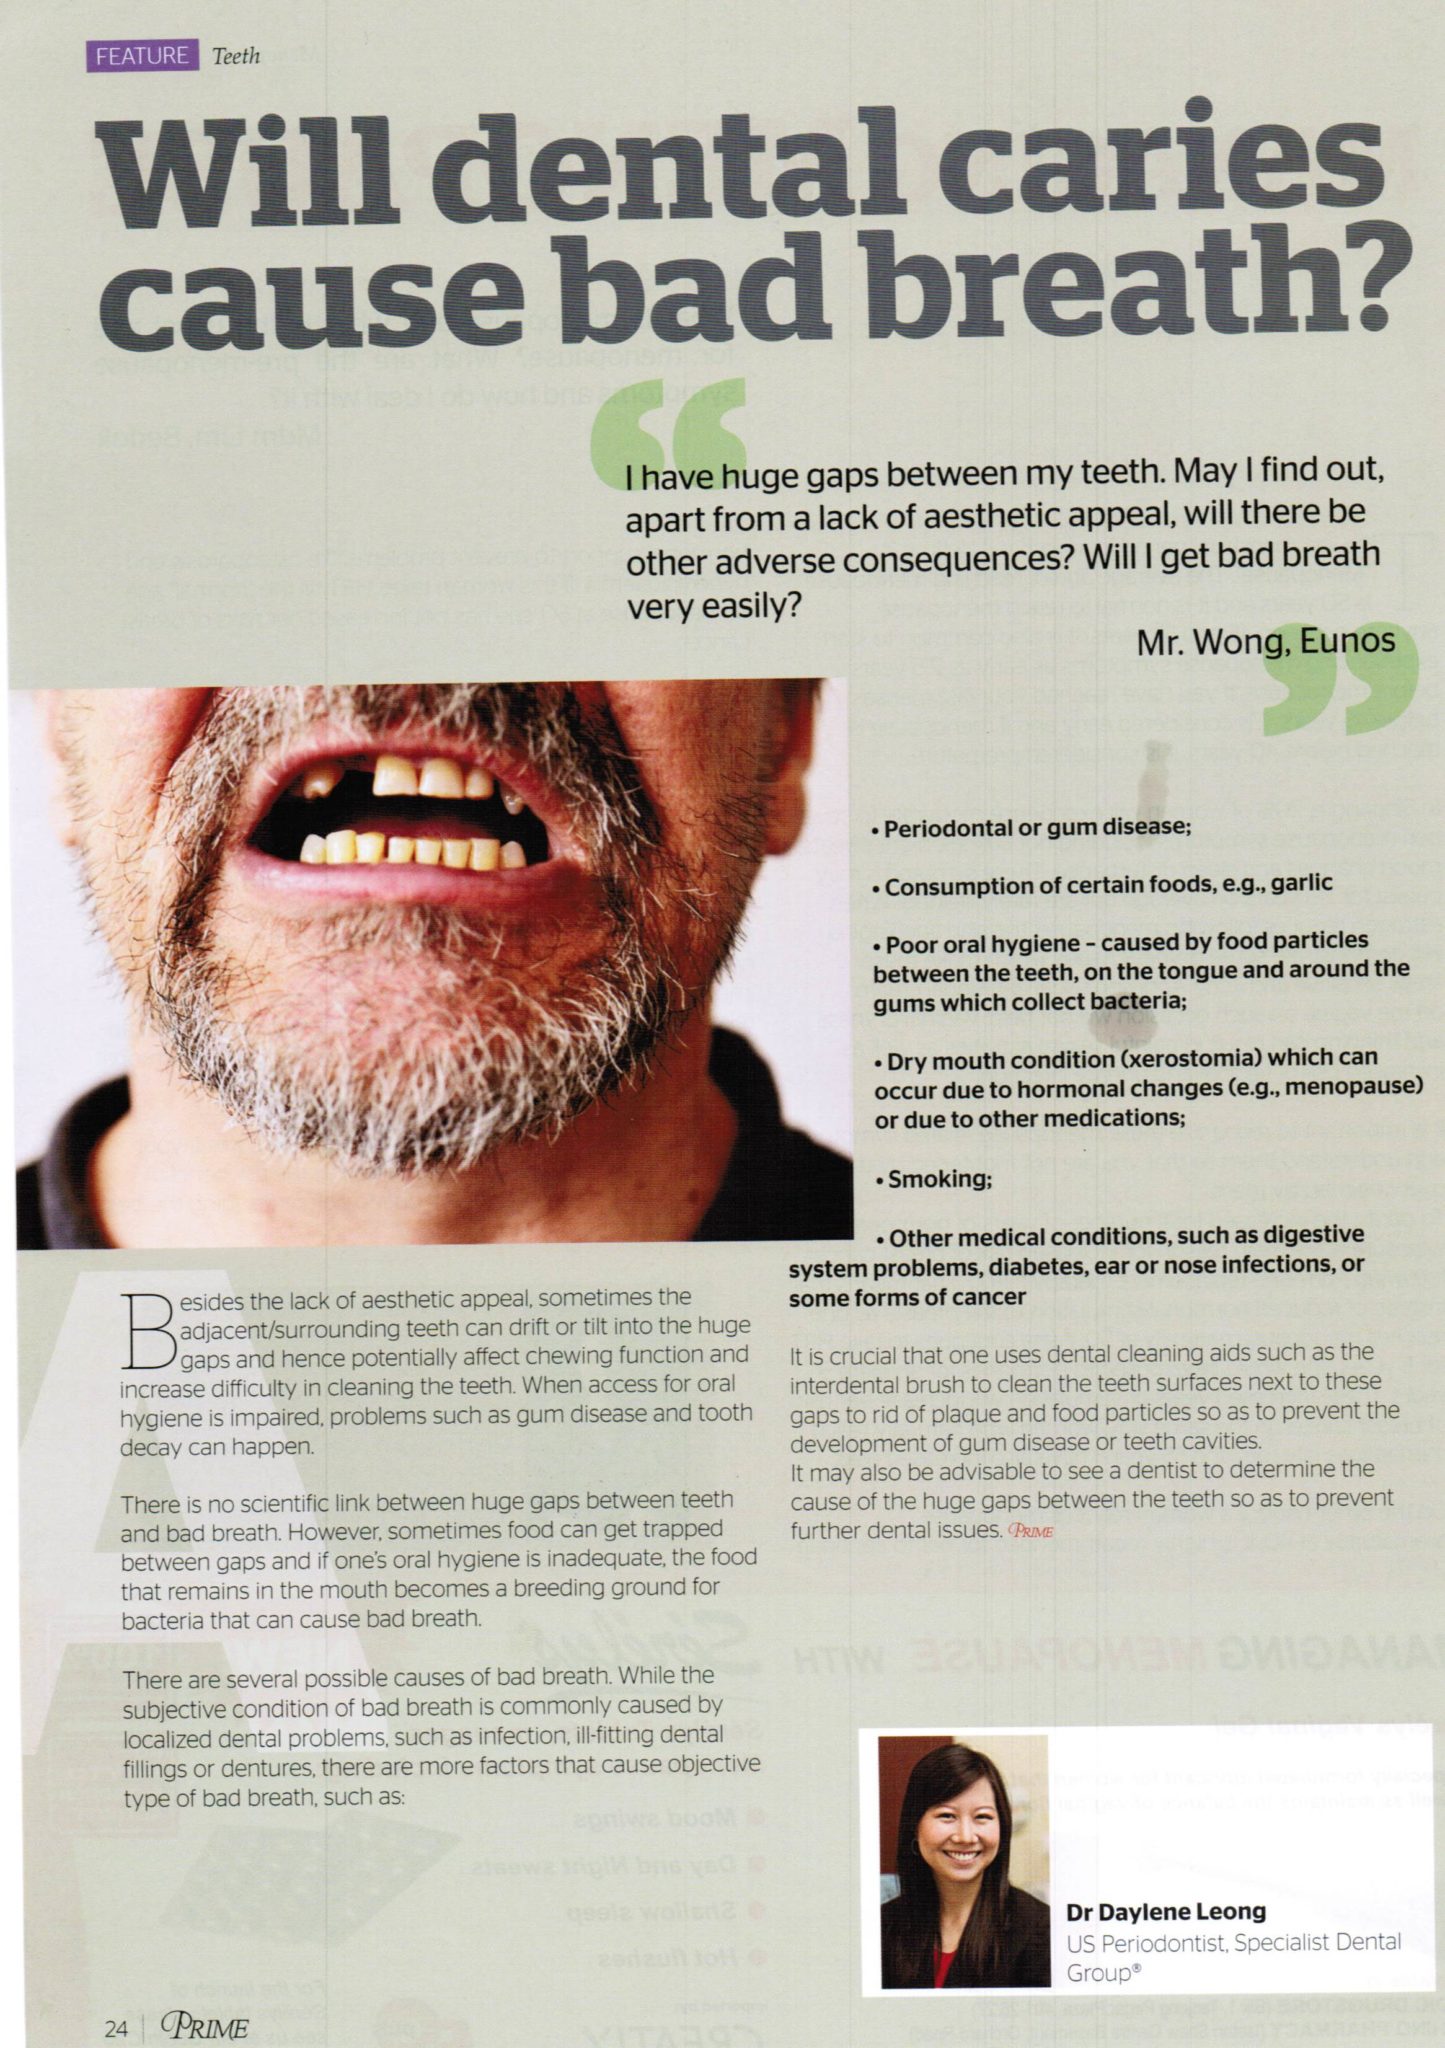 Prime Magazine, February – March 2014 issue: “Will dental caries cause bad breath?”